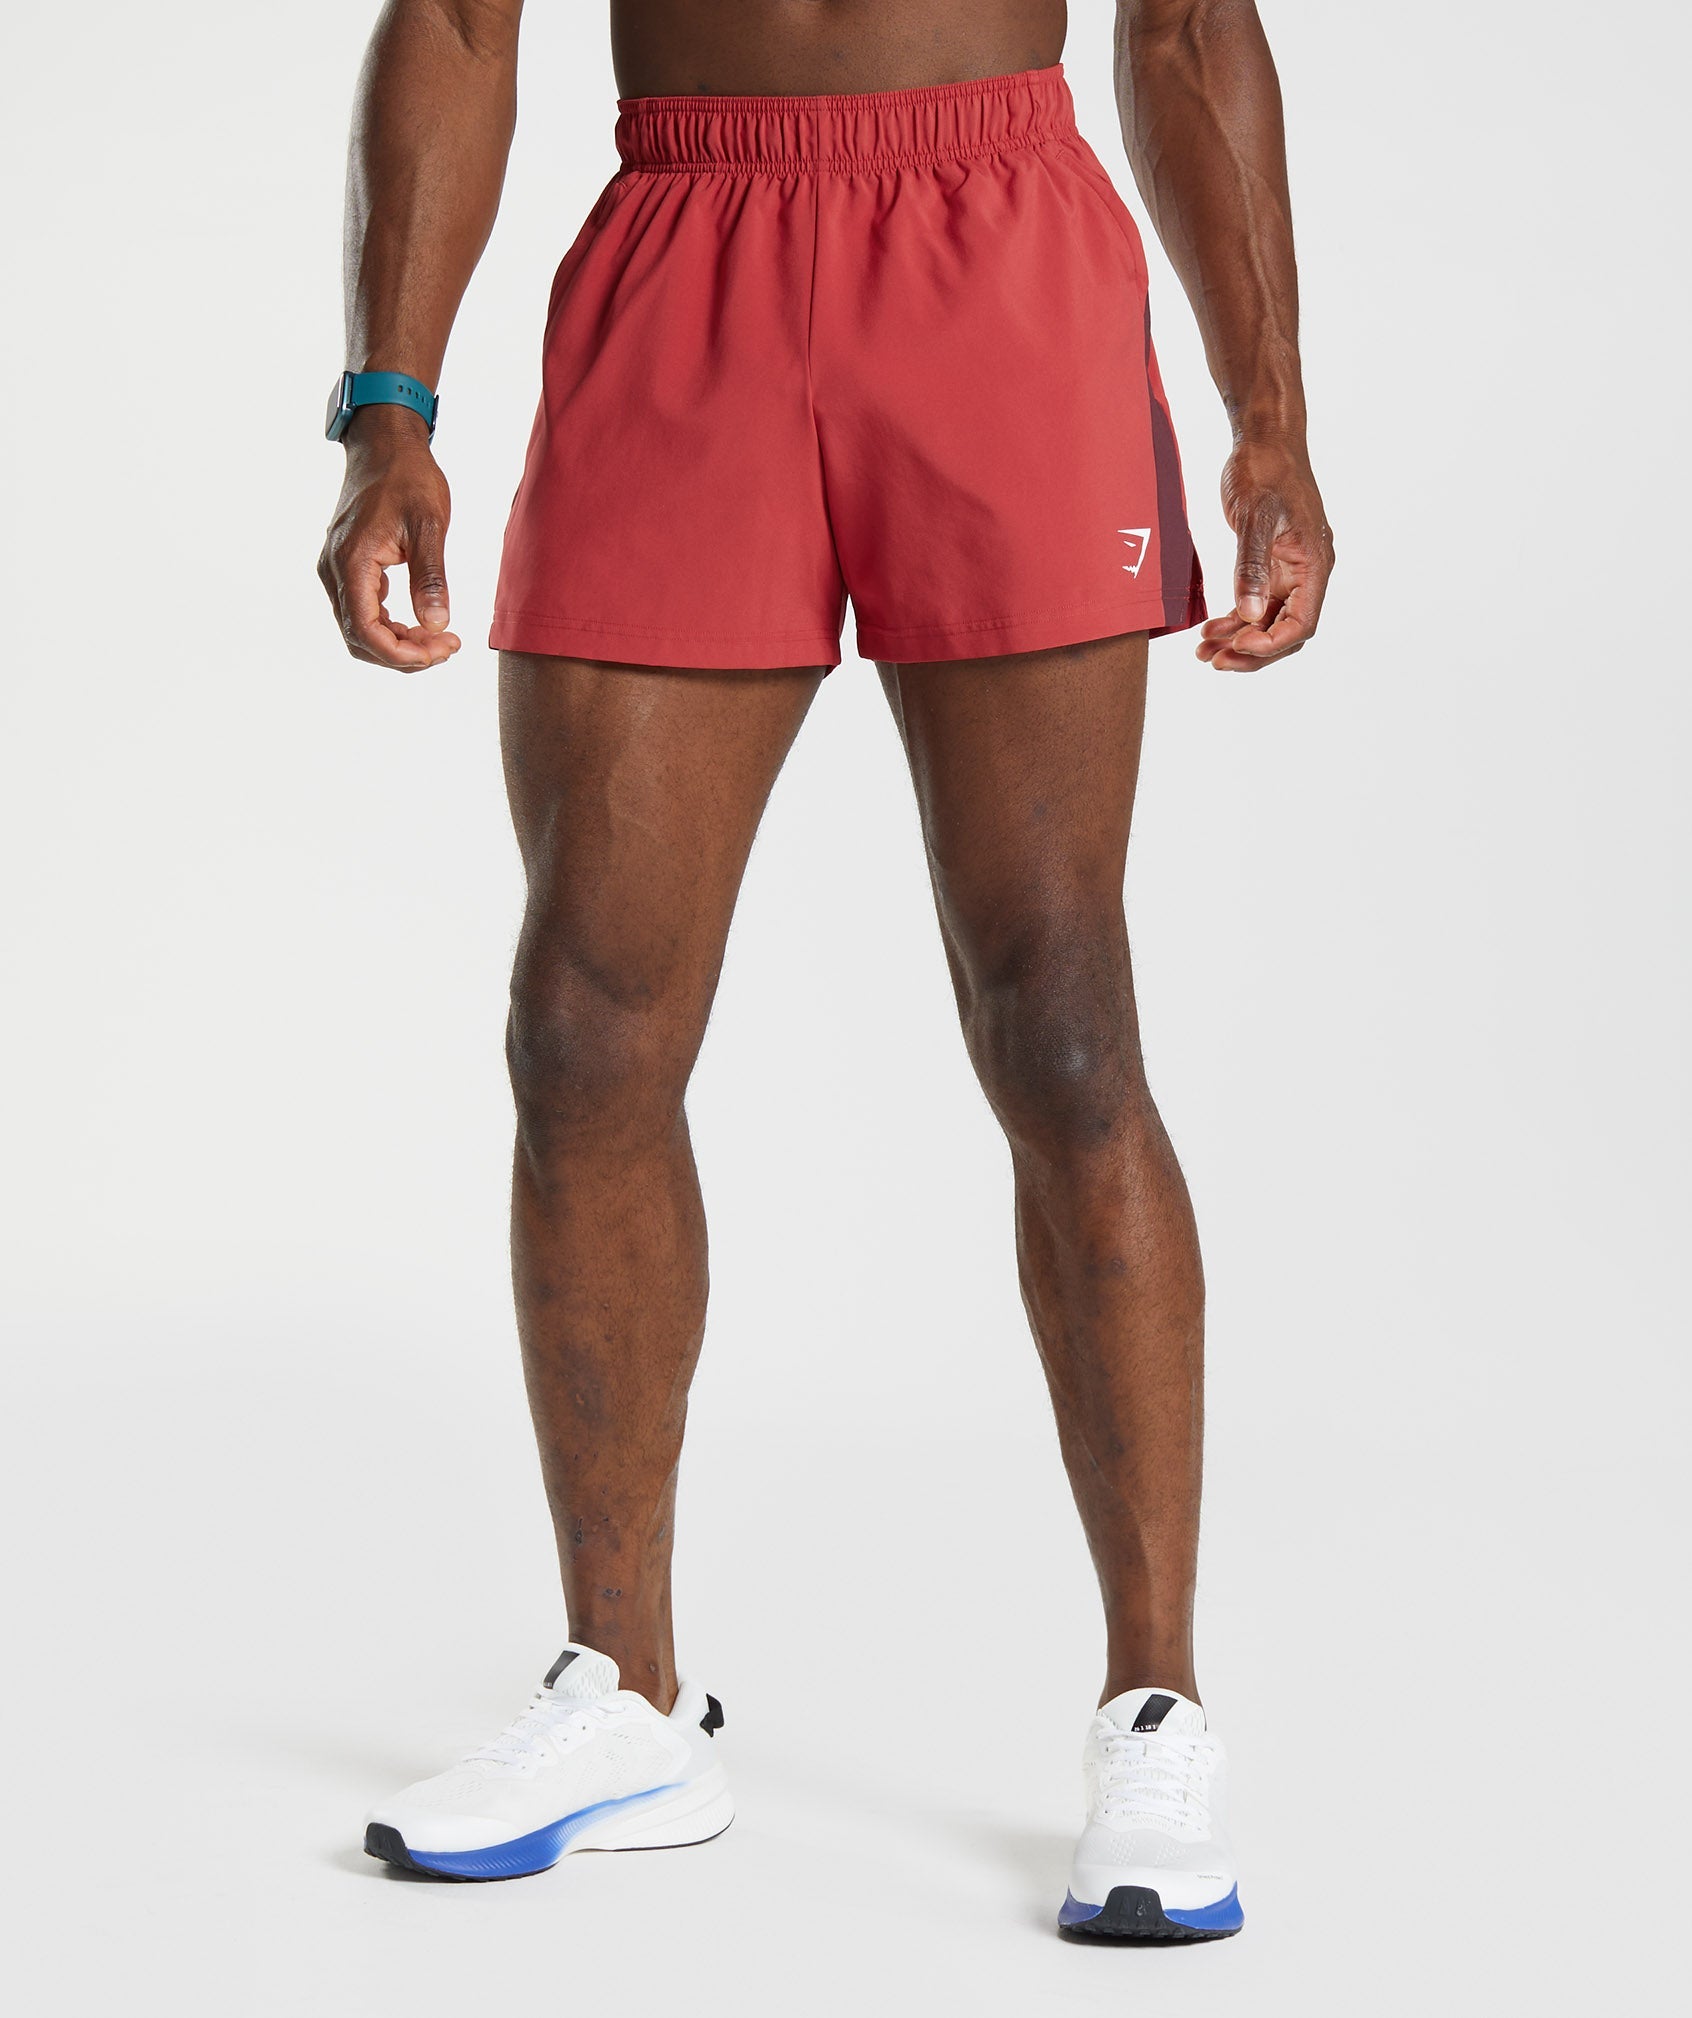 Sport 5" Shorts in Salsa Red/ Baked Maroon - view 1